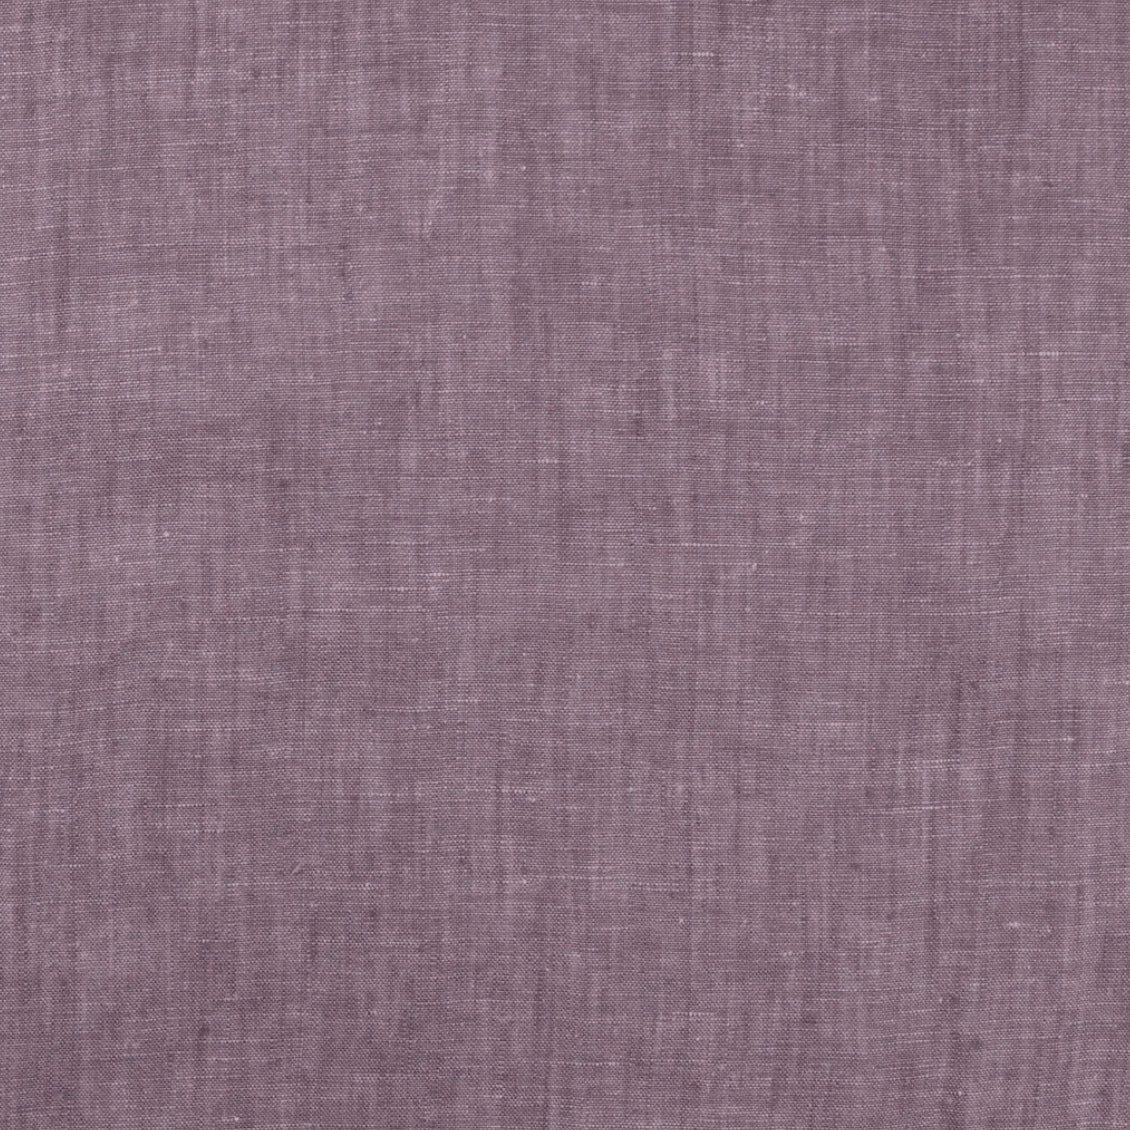 Lilac Yarn Dyed Pure Linen Fabric